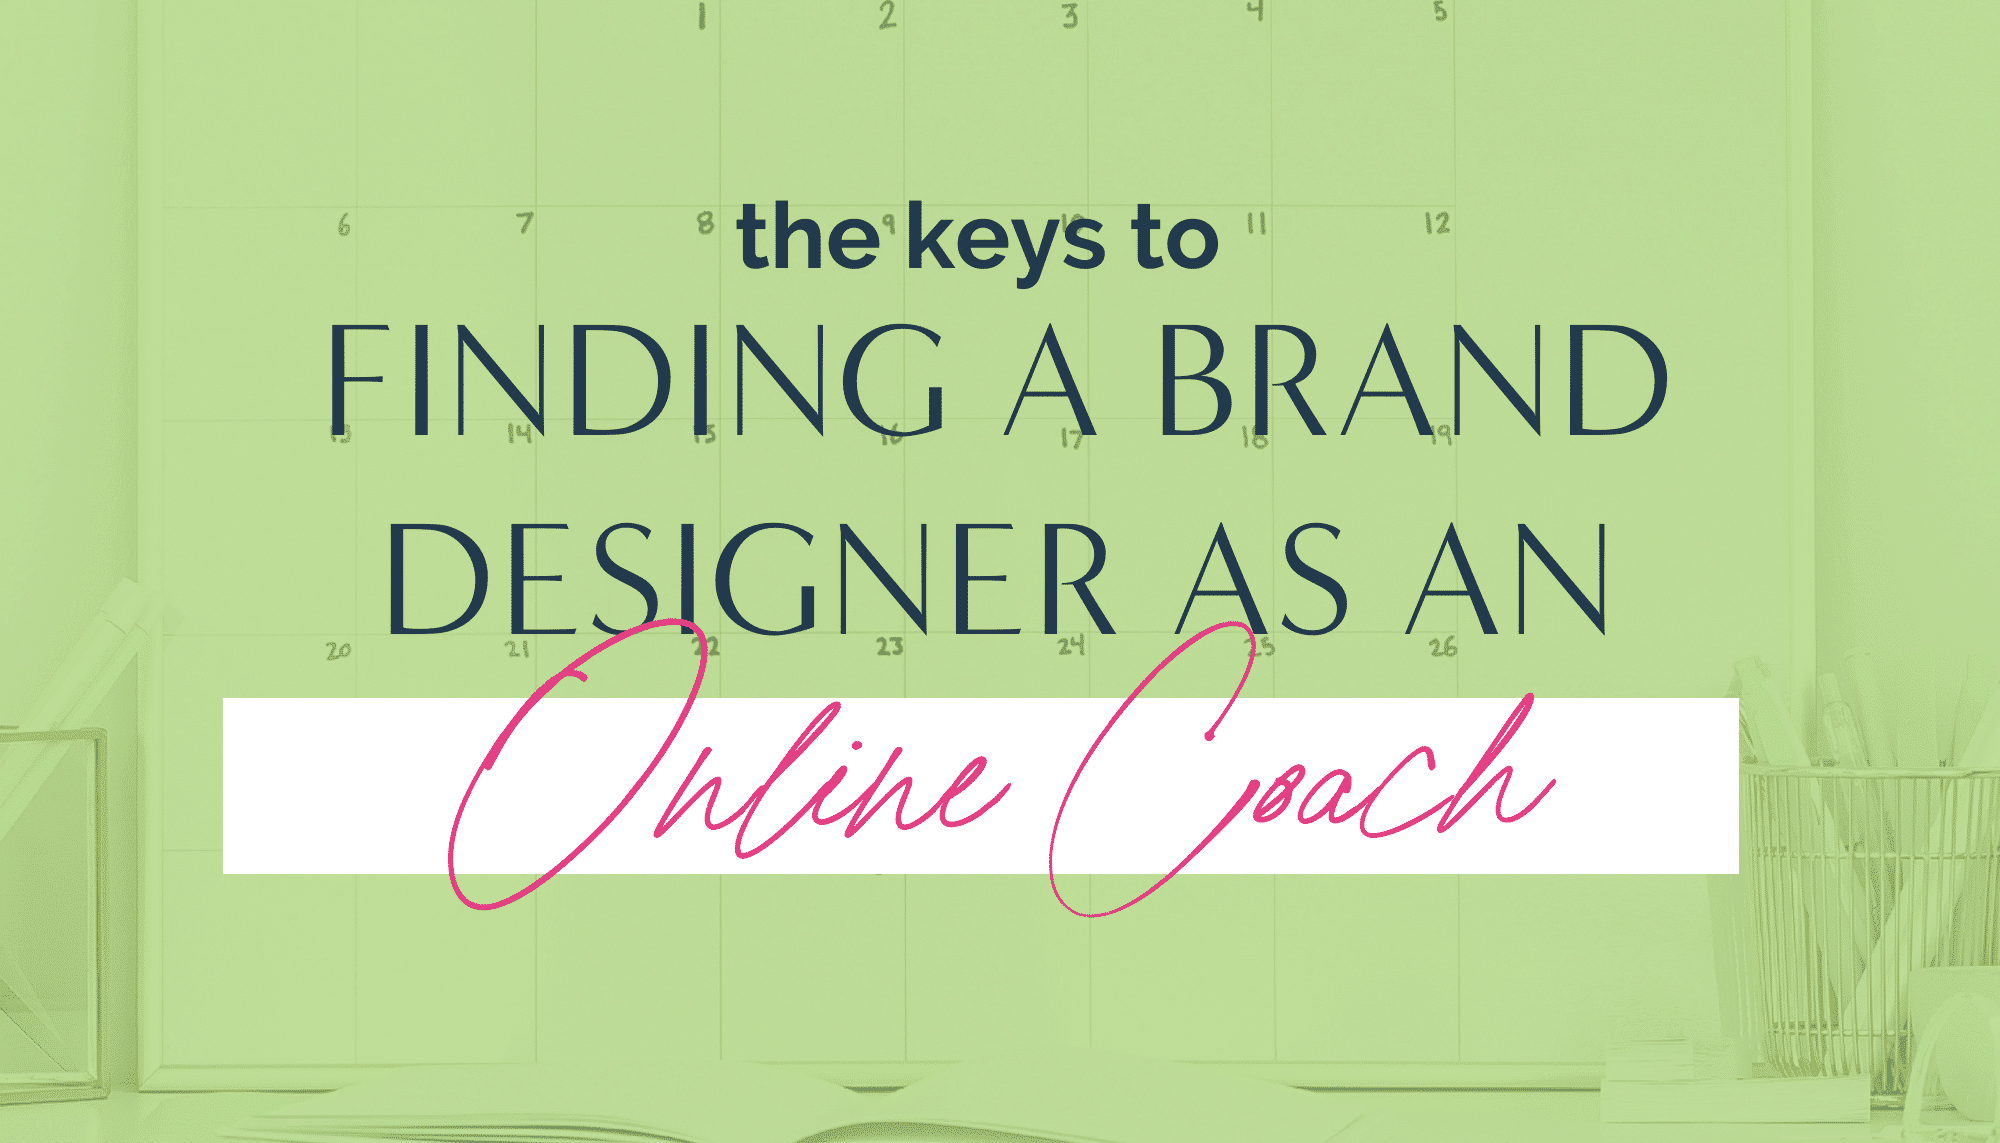 Finding a brand designer as an online coach here are the keys | Brand strategy and design Fabi Paolini